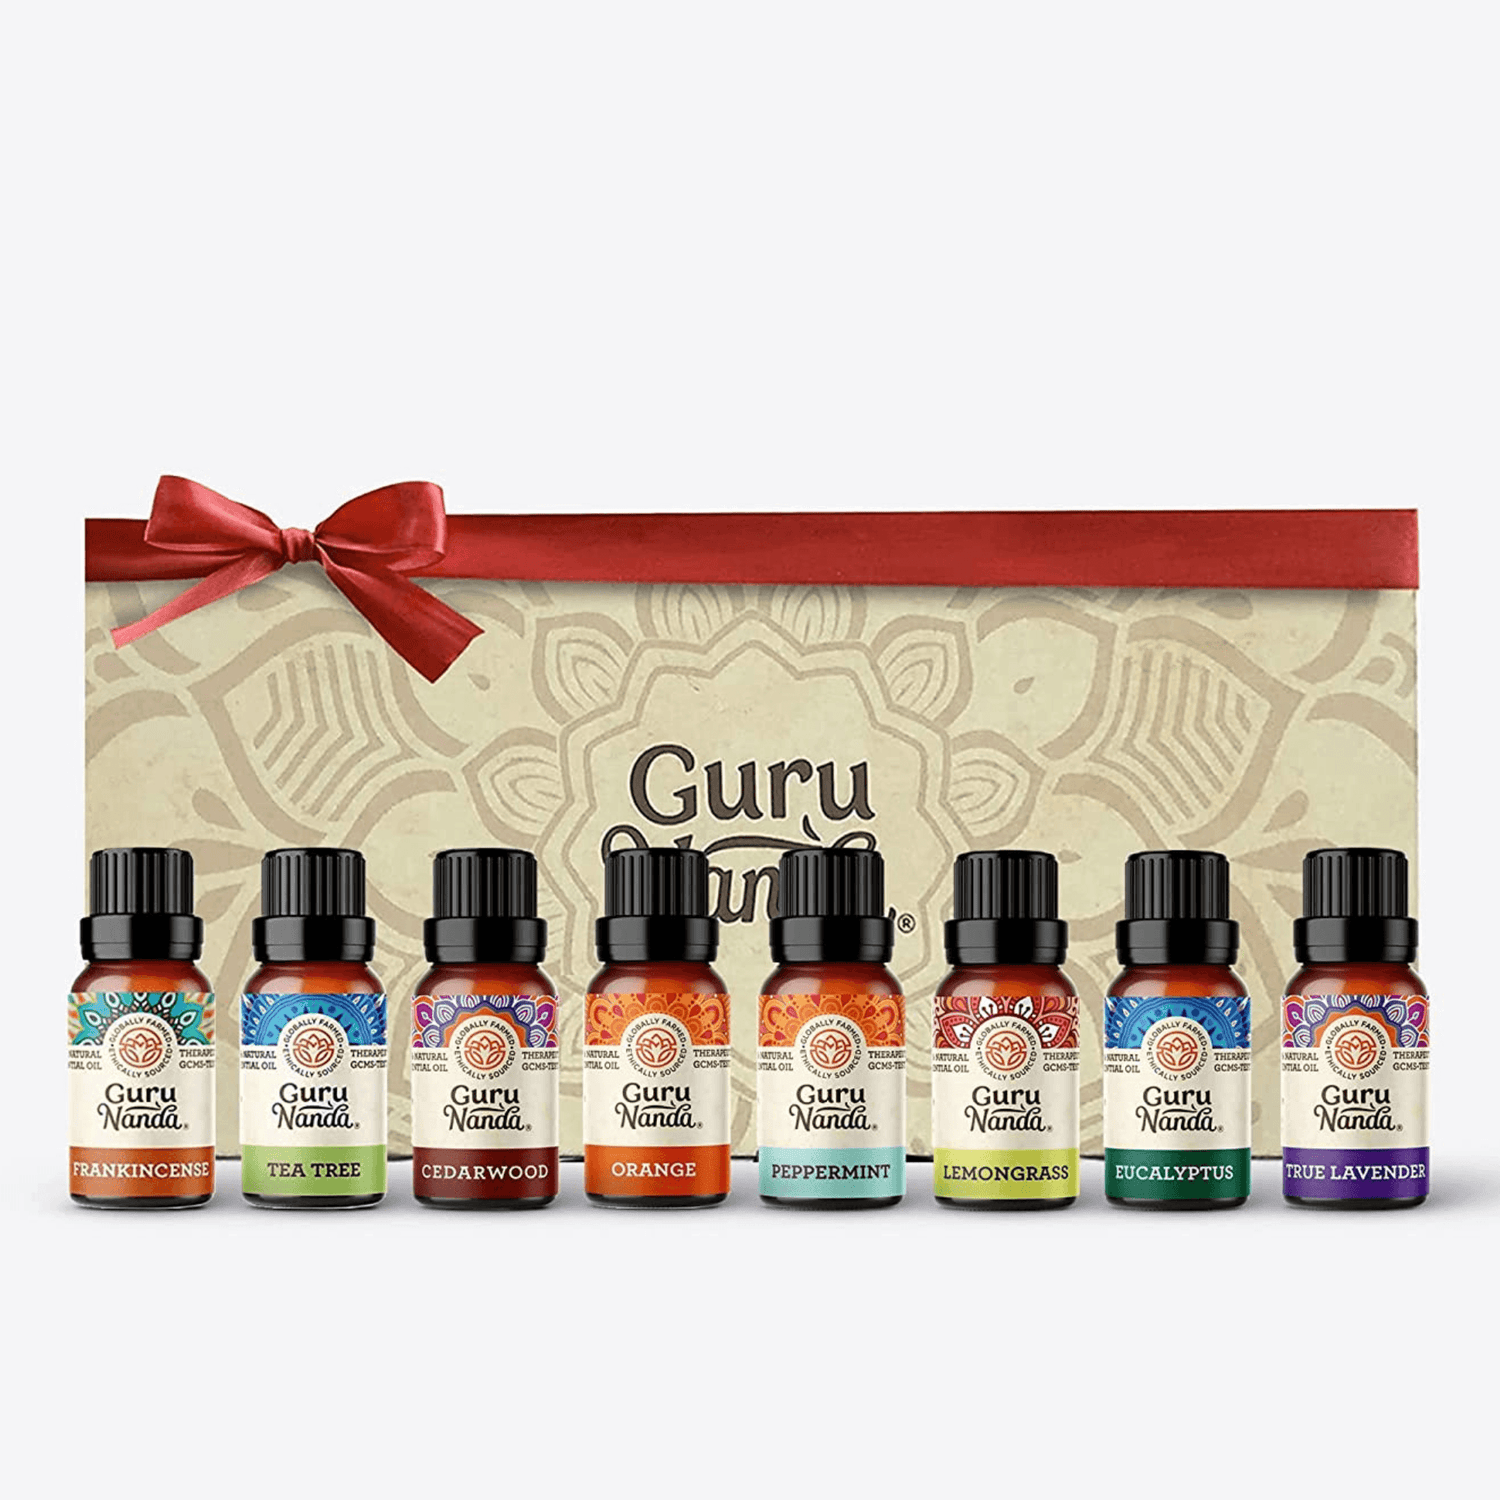 GuruNanda Essential Oil Set Sleep & Relax with Cedarwood, Frankincense,  True Lavender, 100% Pure & Natural, Oils for Diffuser, Aromatherapy and  Wellness 